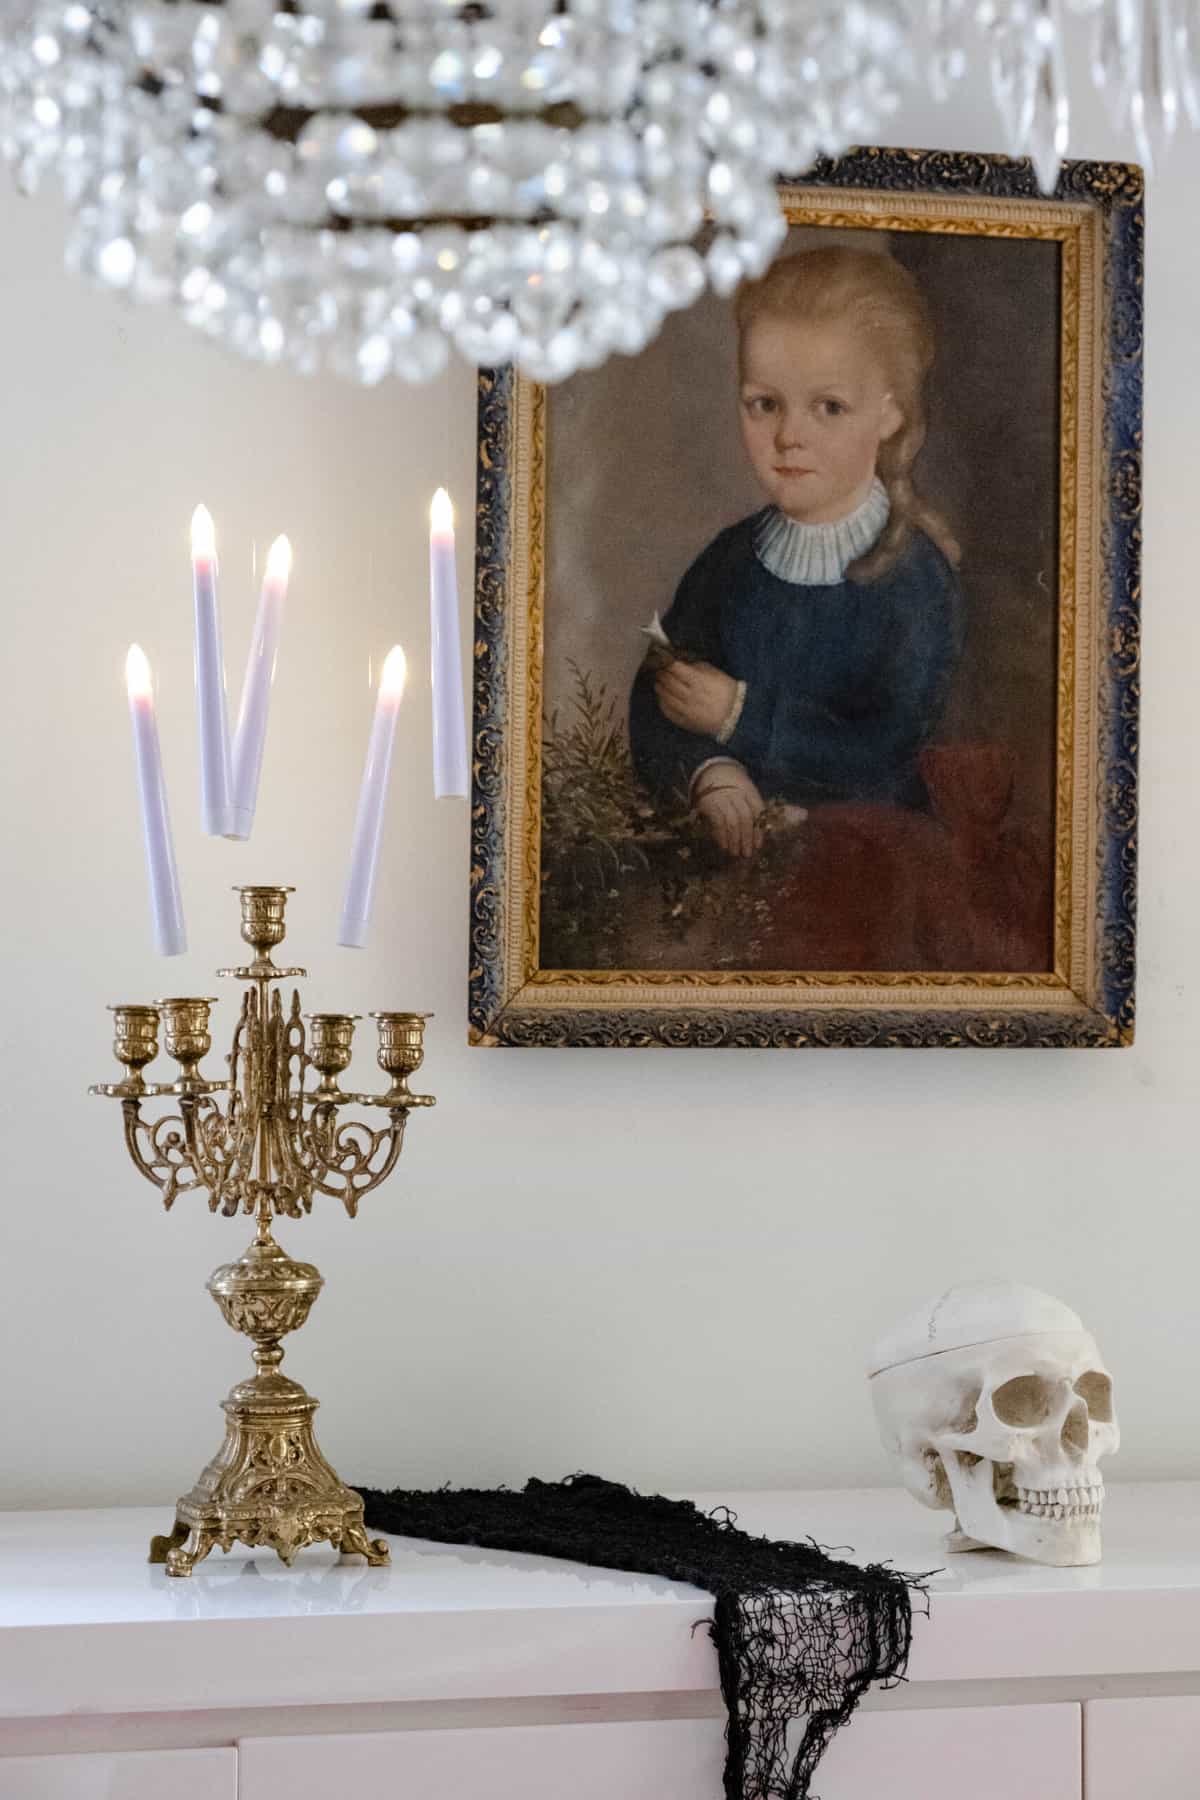 Candles floating in the air over brass candelabra with skull to the side.